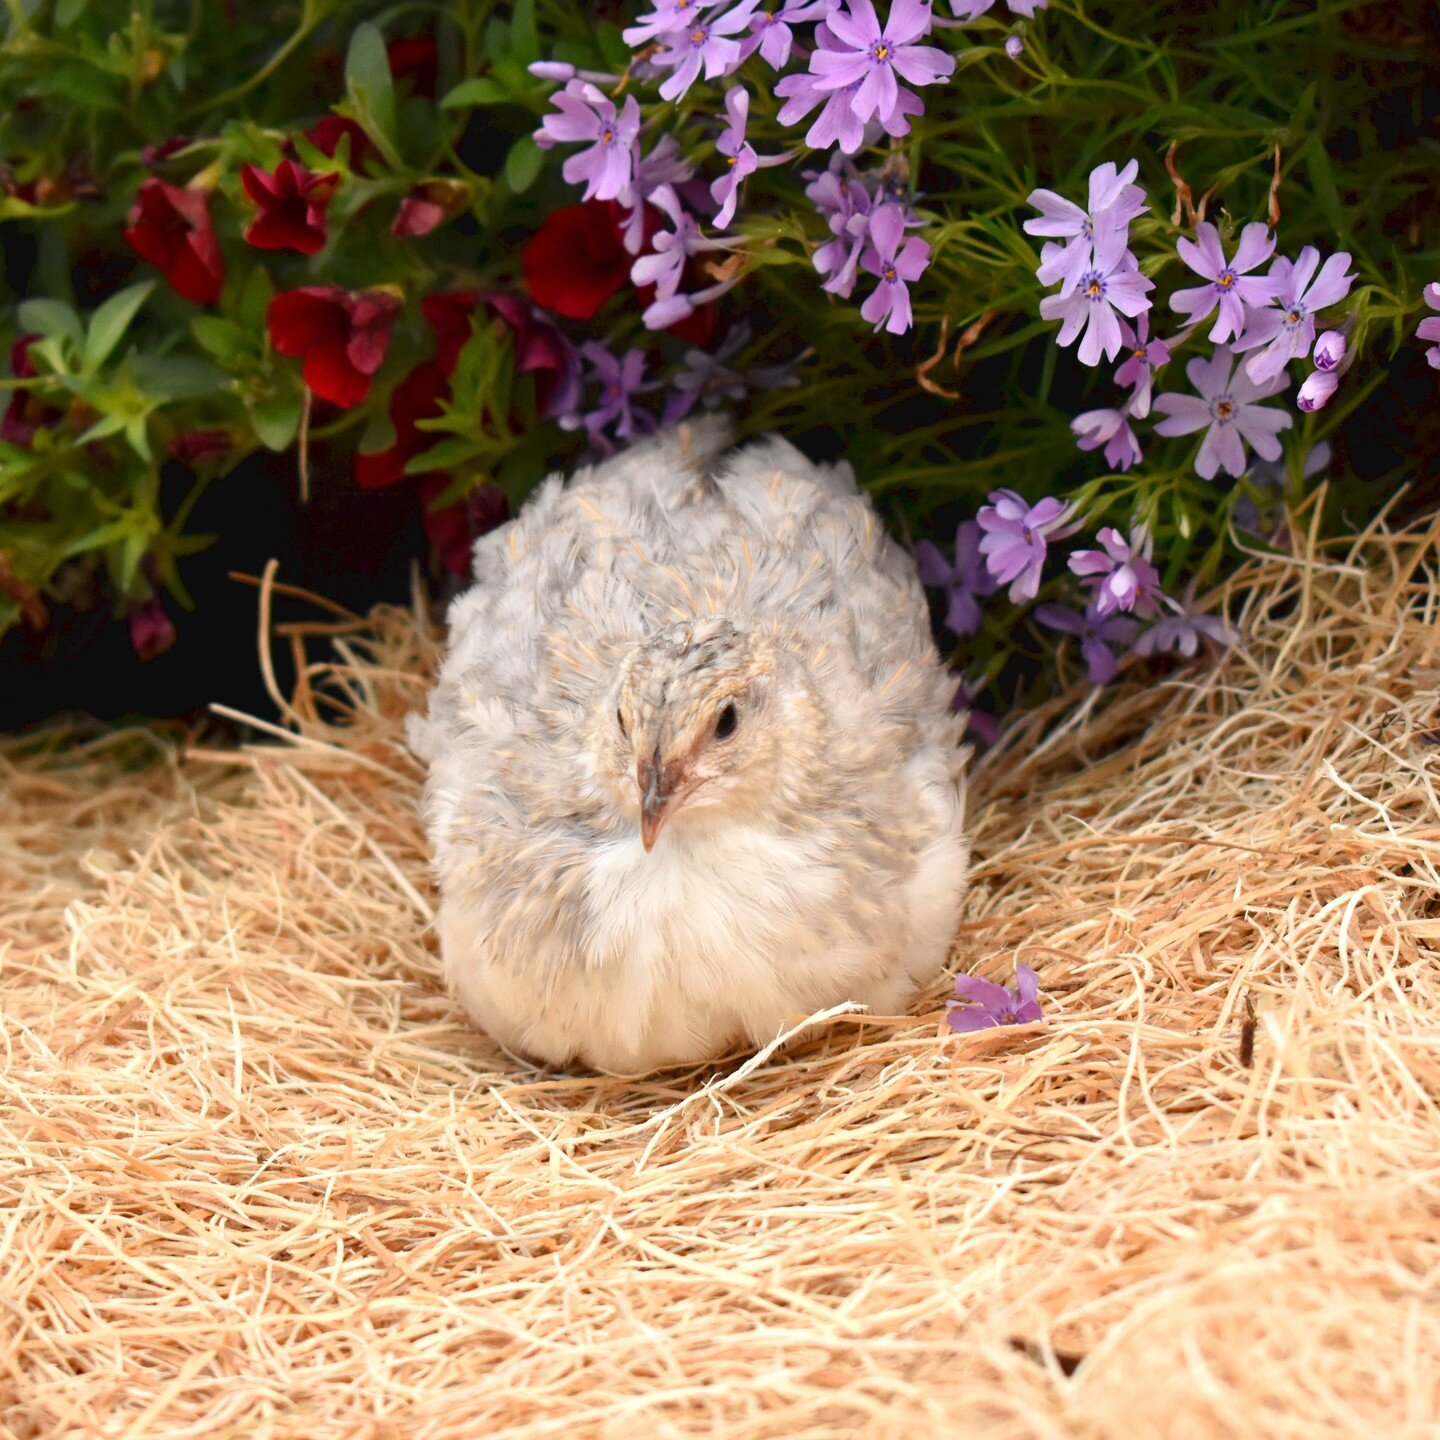 The end of our Coturnix Chicks shipping is coming soon MAY 30TH! 

All our shipped Coturnix Chicks are ON SALE NOW! 

SAVE $0.50-0.75 PER CHICK! 

Help our small family business sell out the rest of our coturnix for our 2023 season:) Sharing is appre